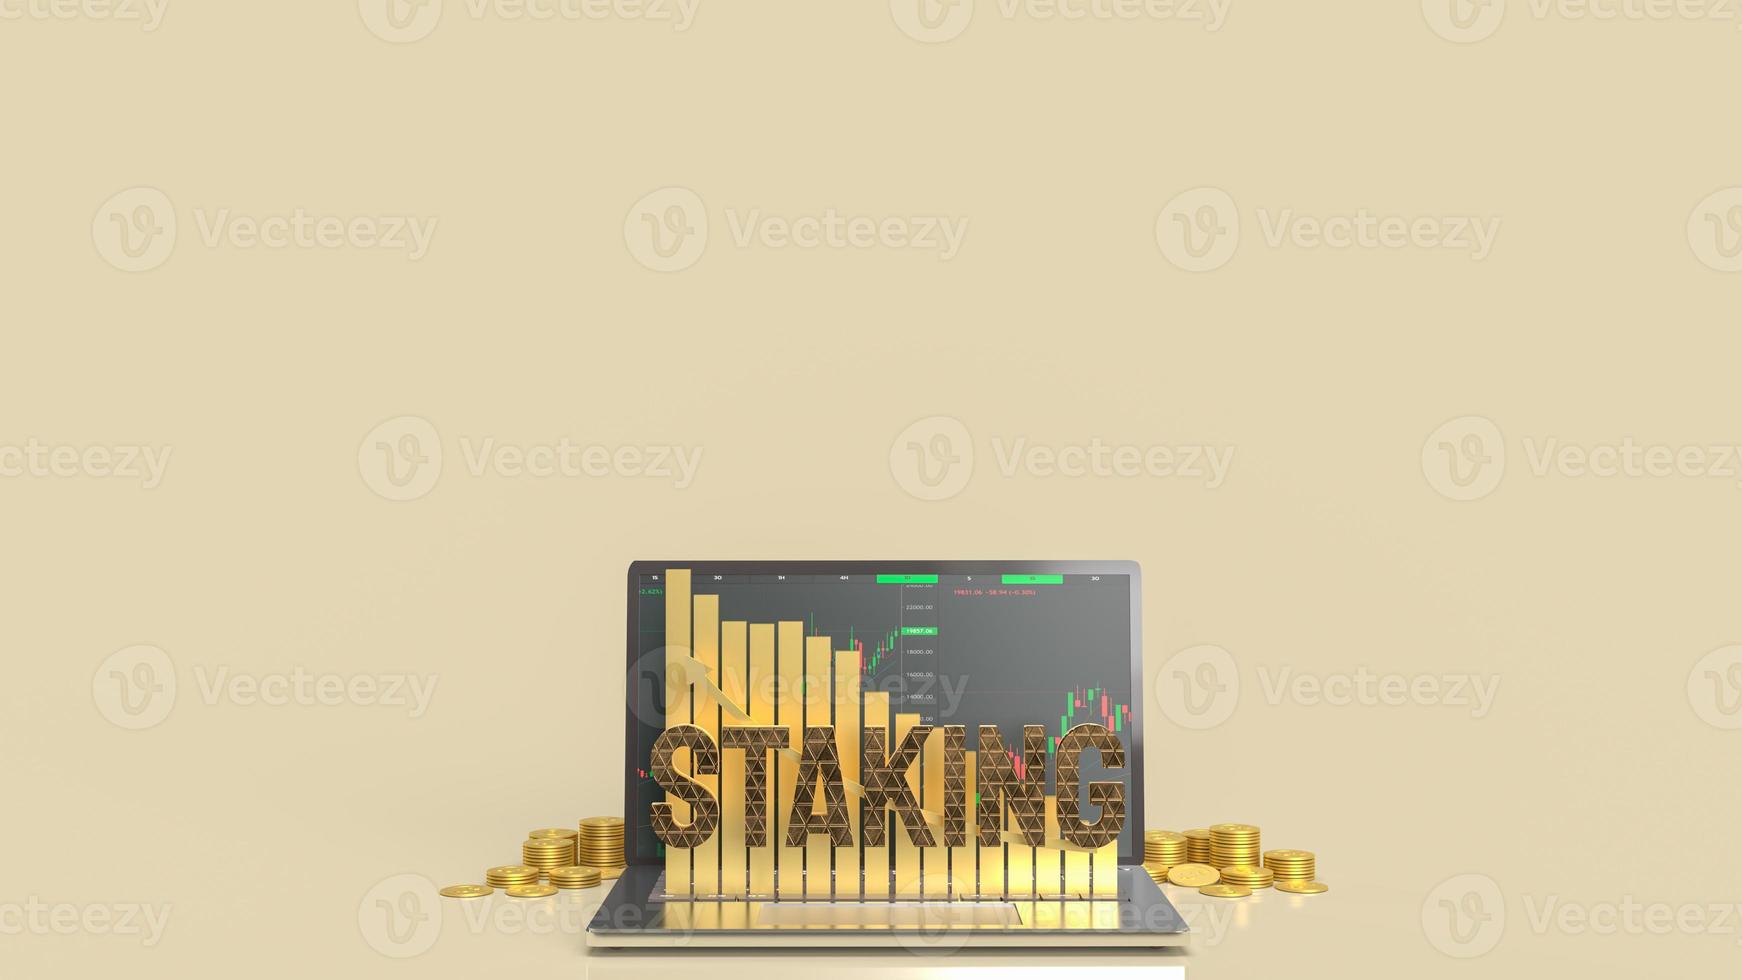 staking text on notebook for currency or business concept 3d rendering photo